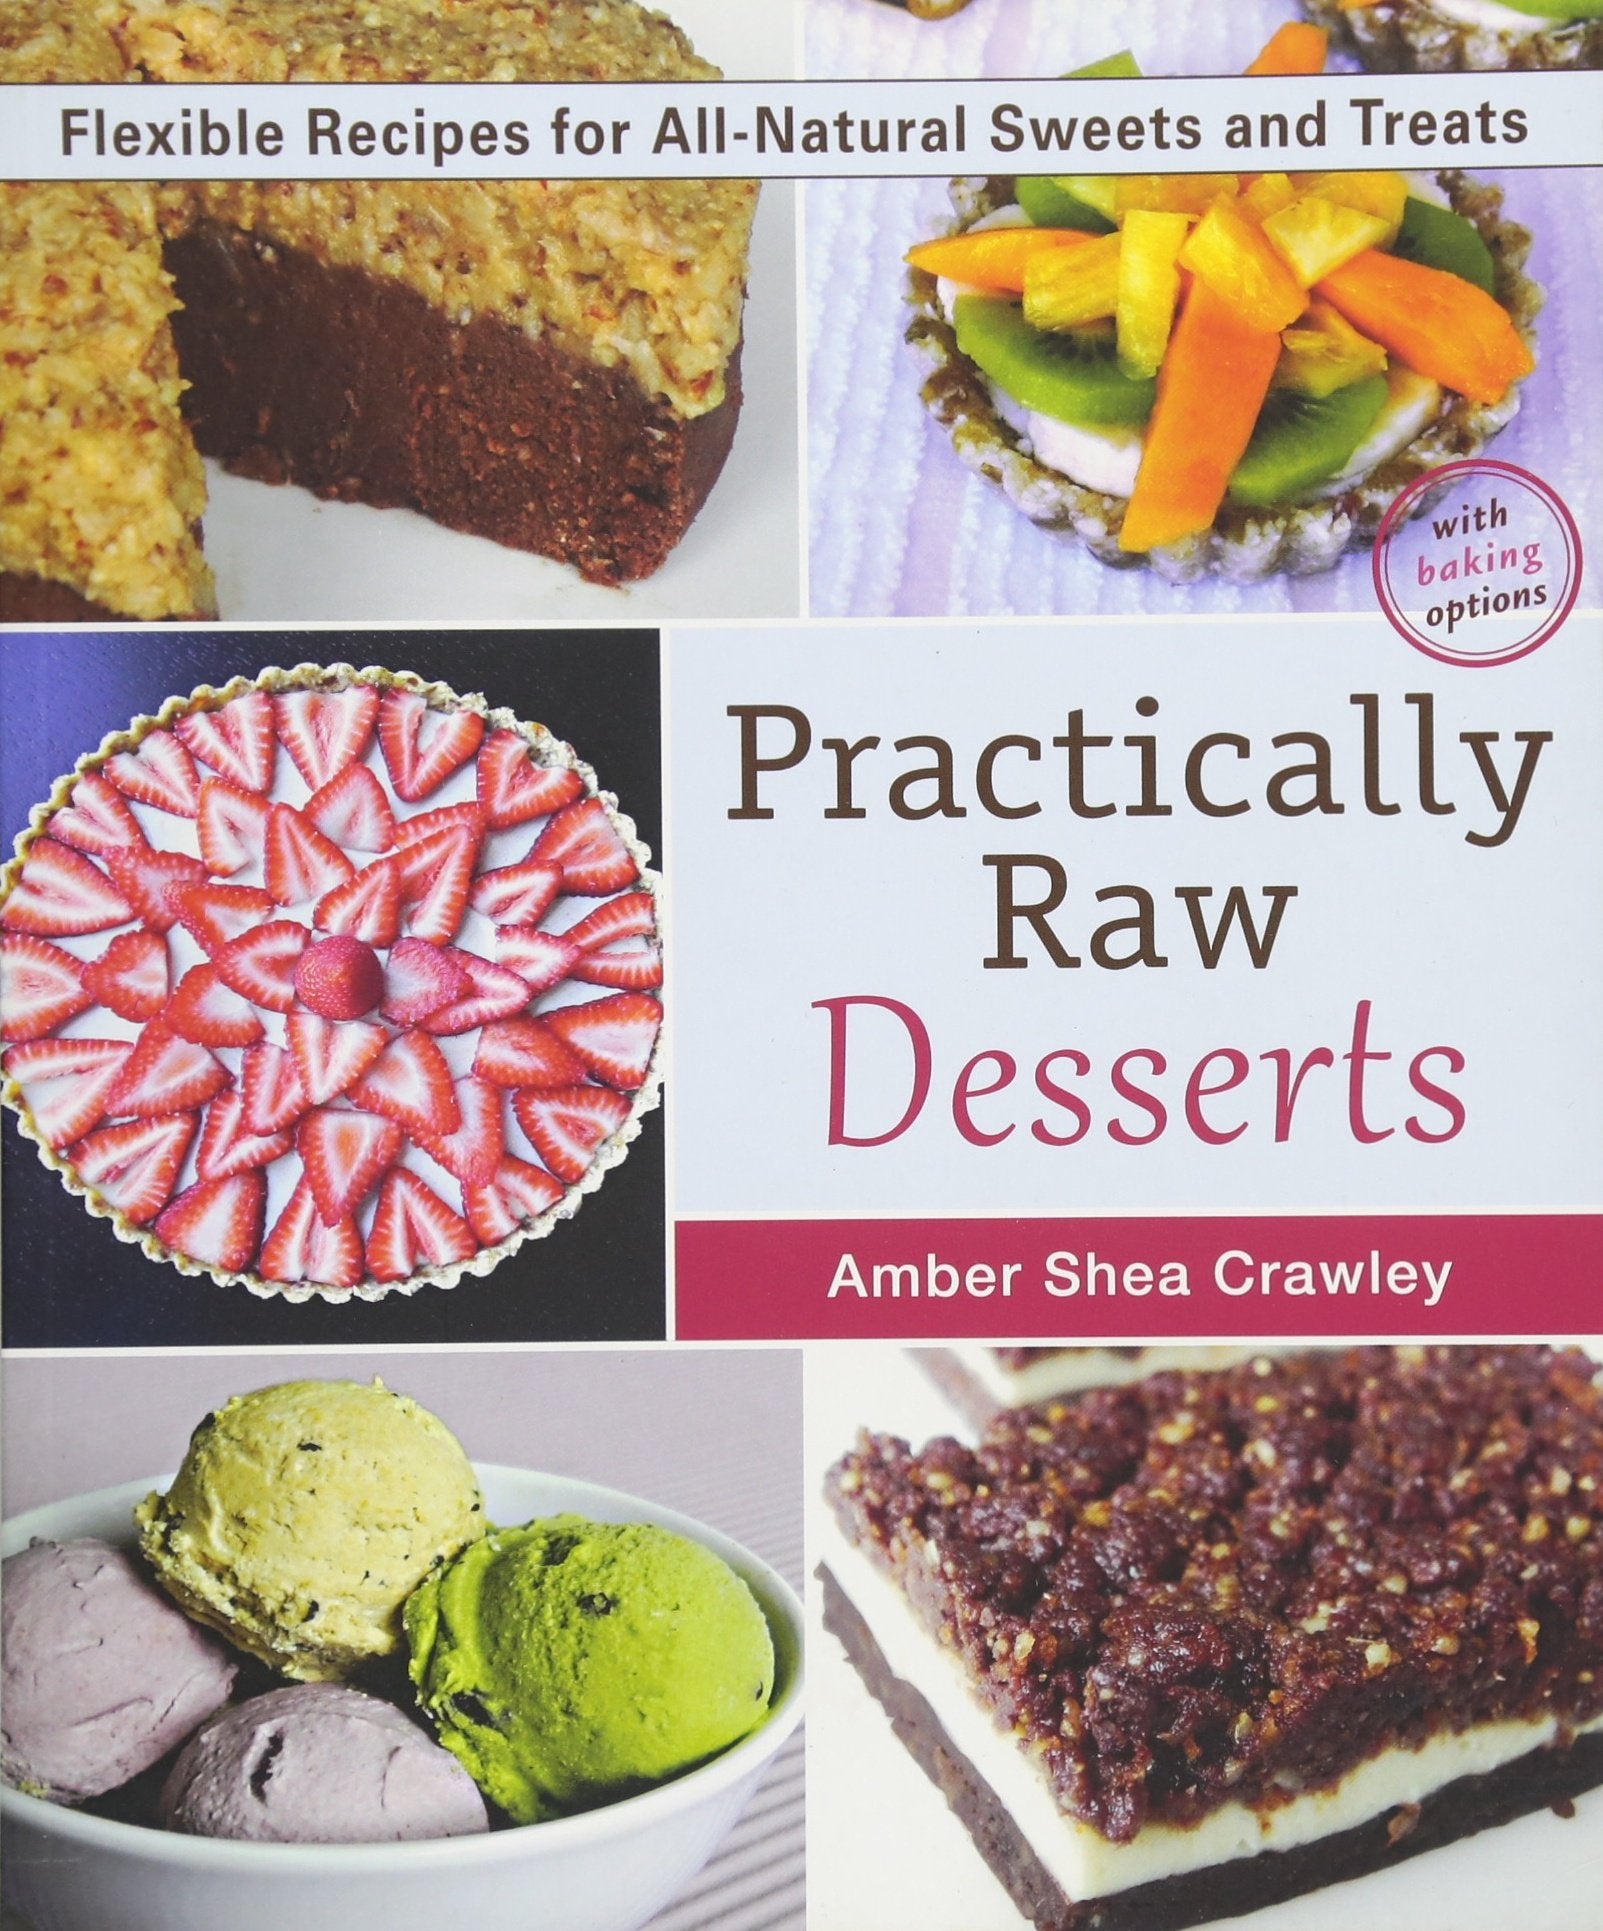 *Sale* (Special Diet - Raw) Amber Shea Crawley. Practically Raw Desserts: Flexible Recipes for All-Natural Sweets and Treats.